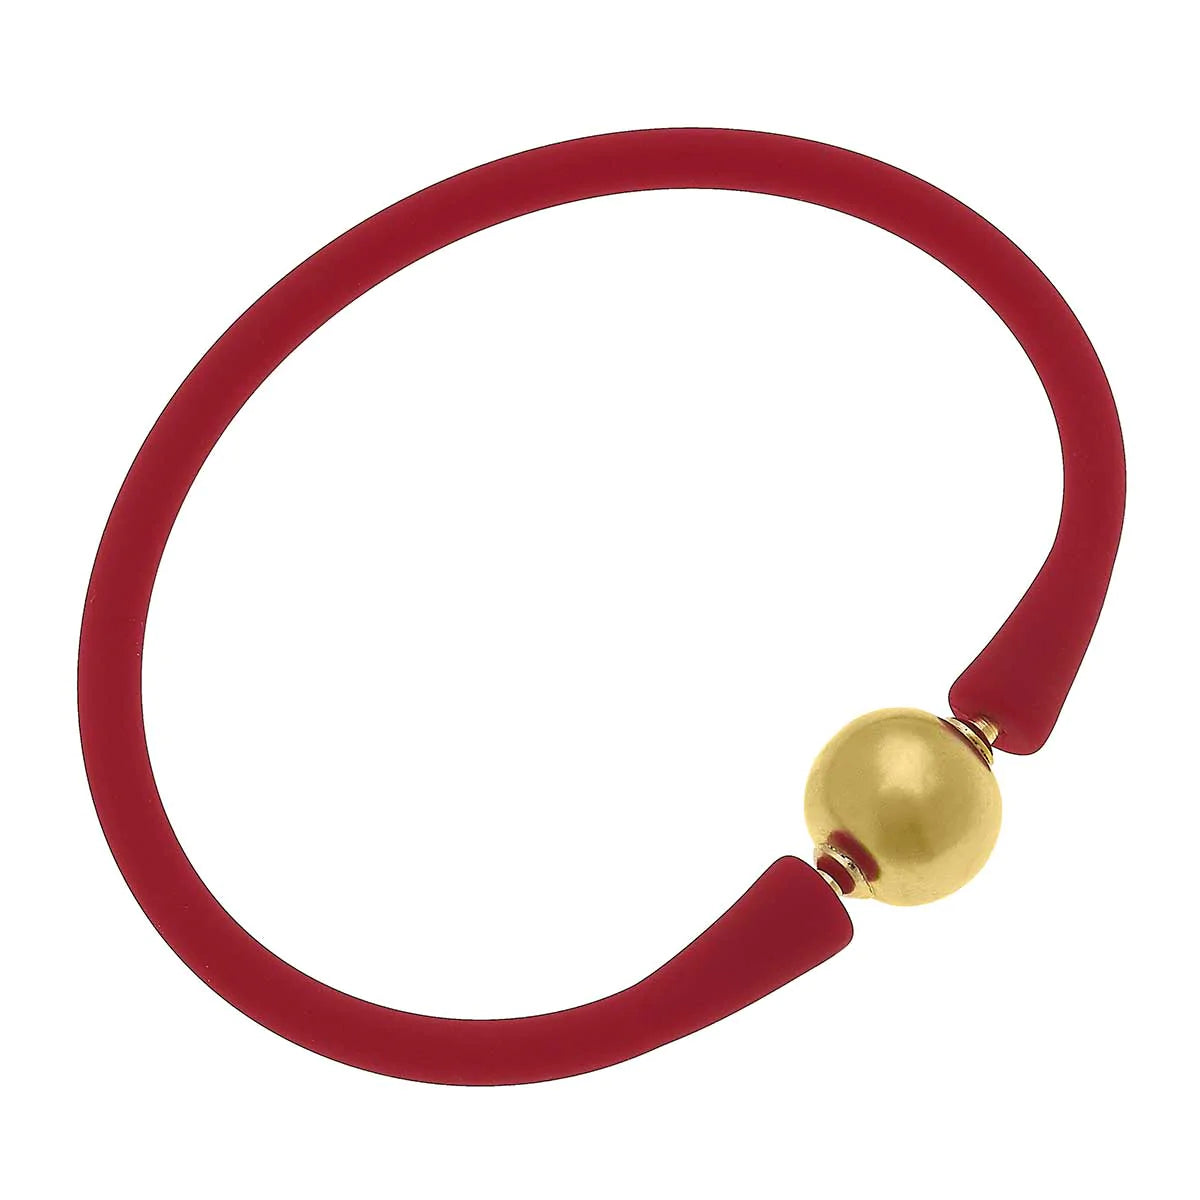 Bali 24K Gold Plated Ball Bead Silicone Bracelet - Assorted Colors